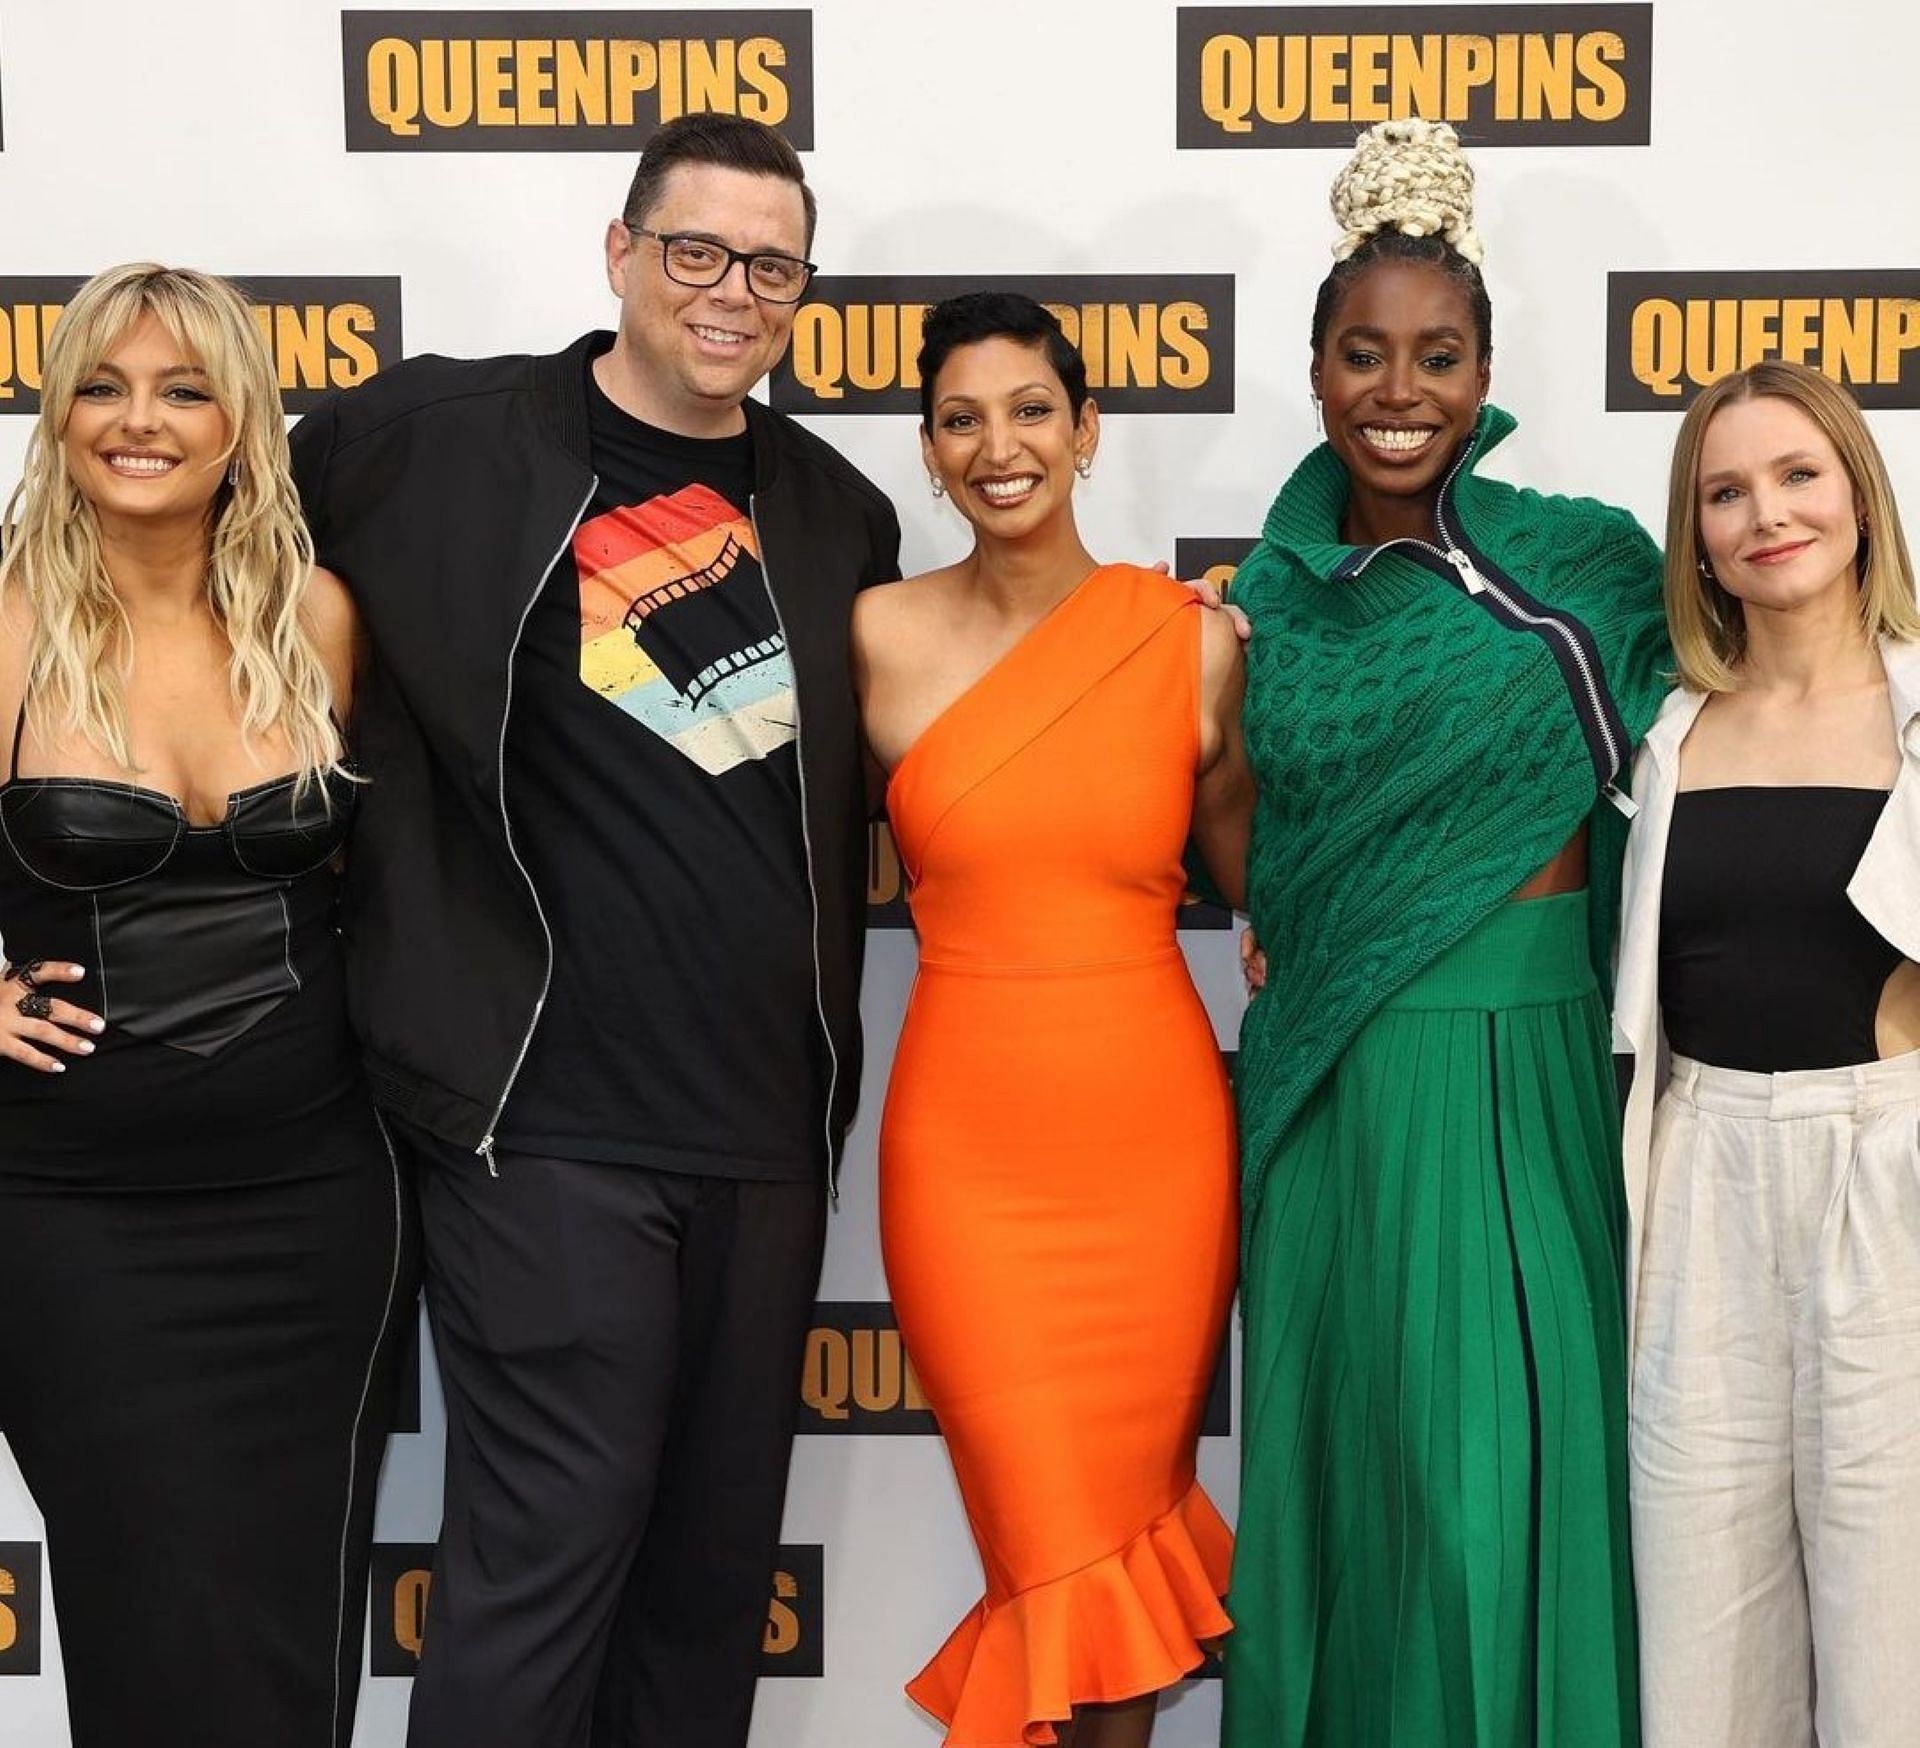 Kristen Bell and Kirby Howell-Baptiste stars in the 2021 comedy Queenpins (Image via Instagram)